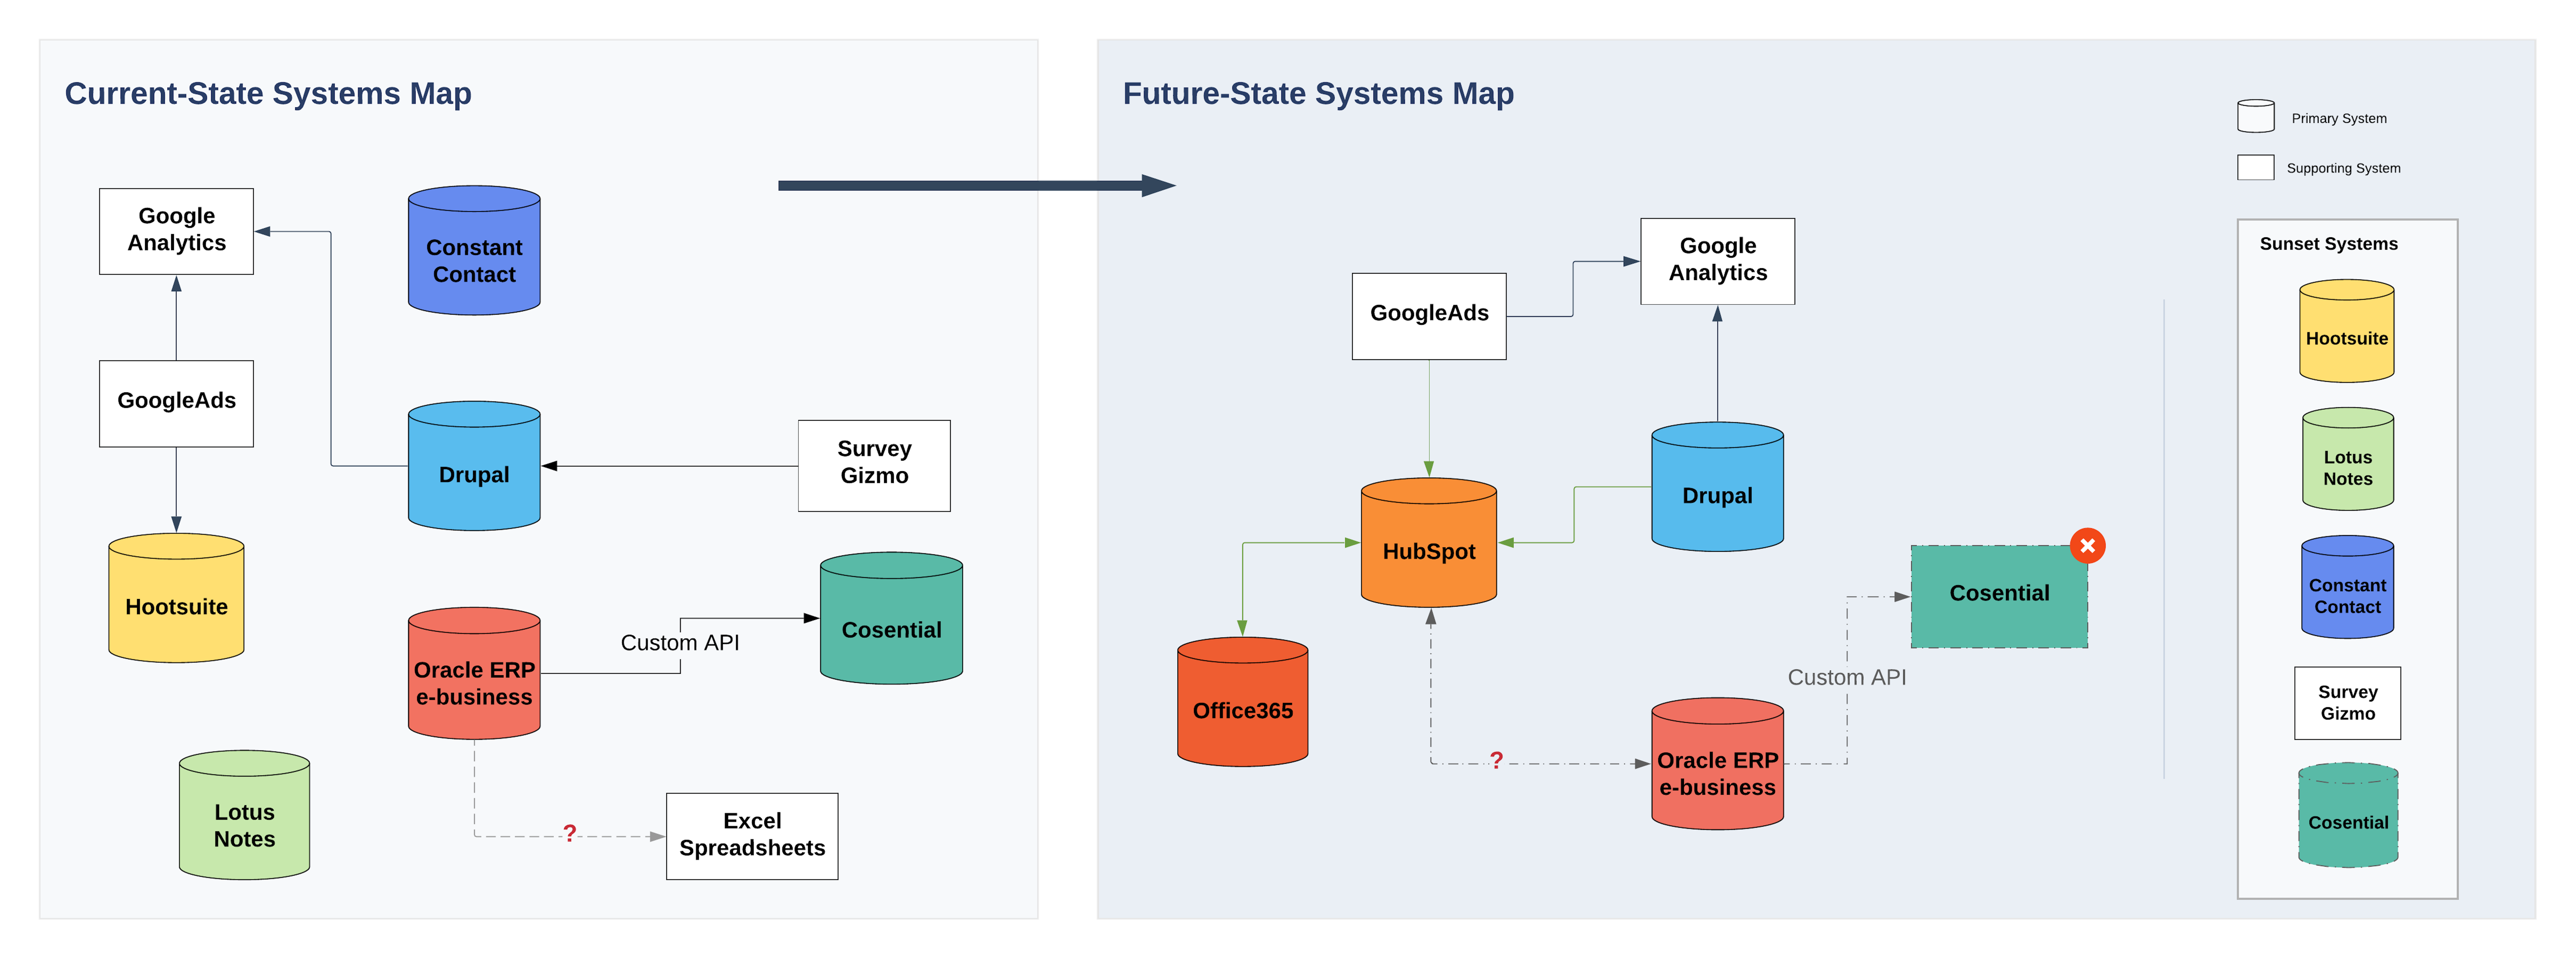 SEH Biz Reqs Mappings - Systems Map - Current - Future